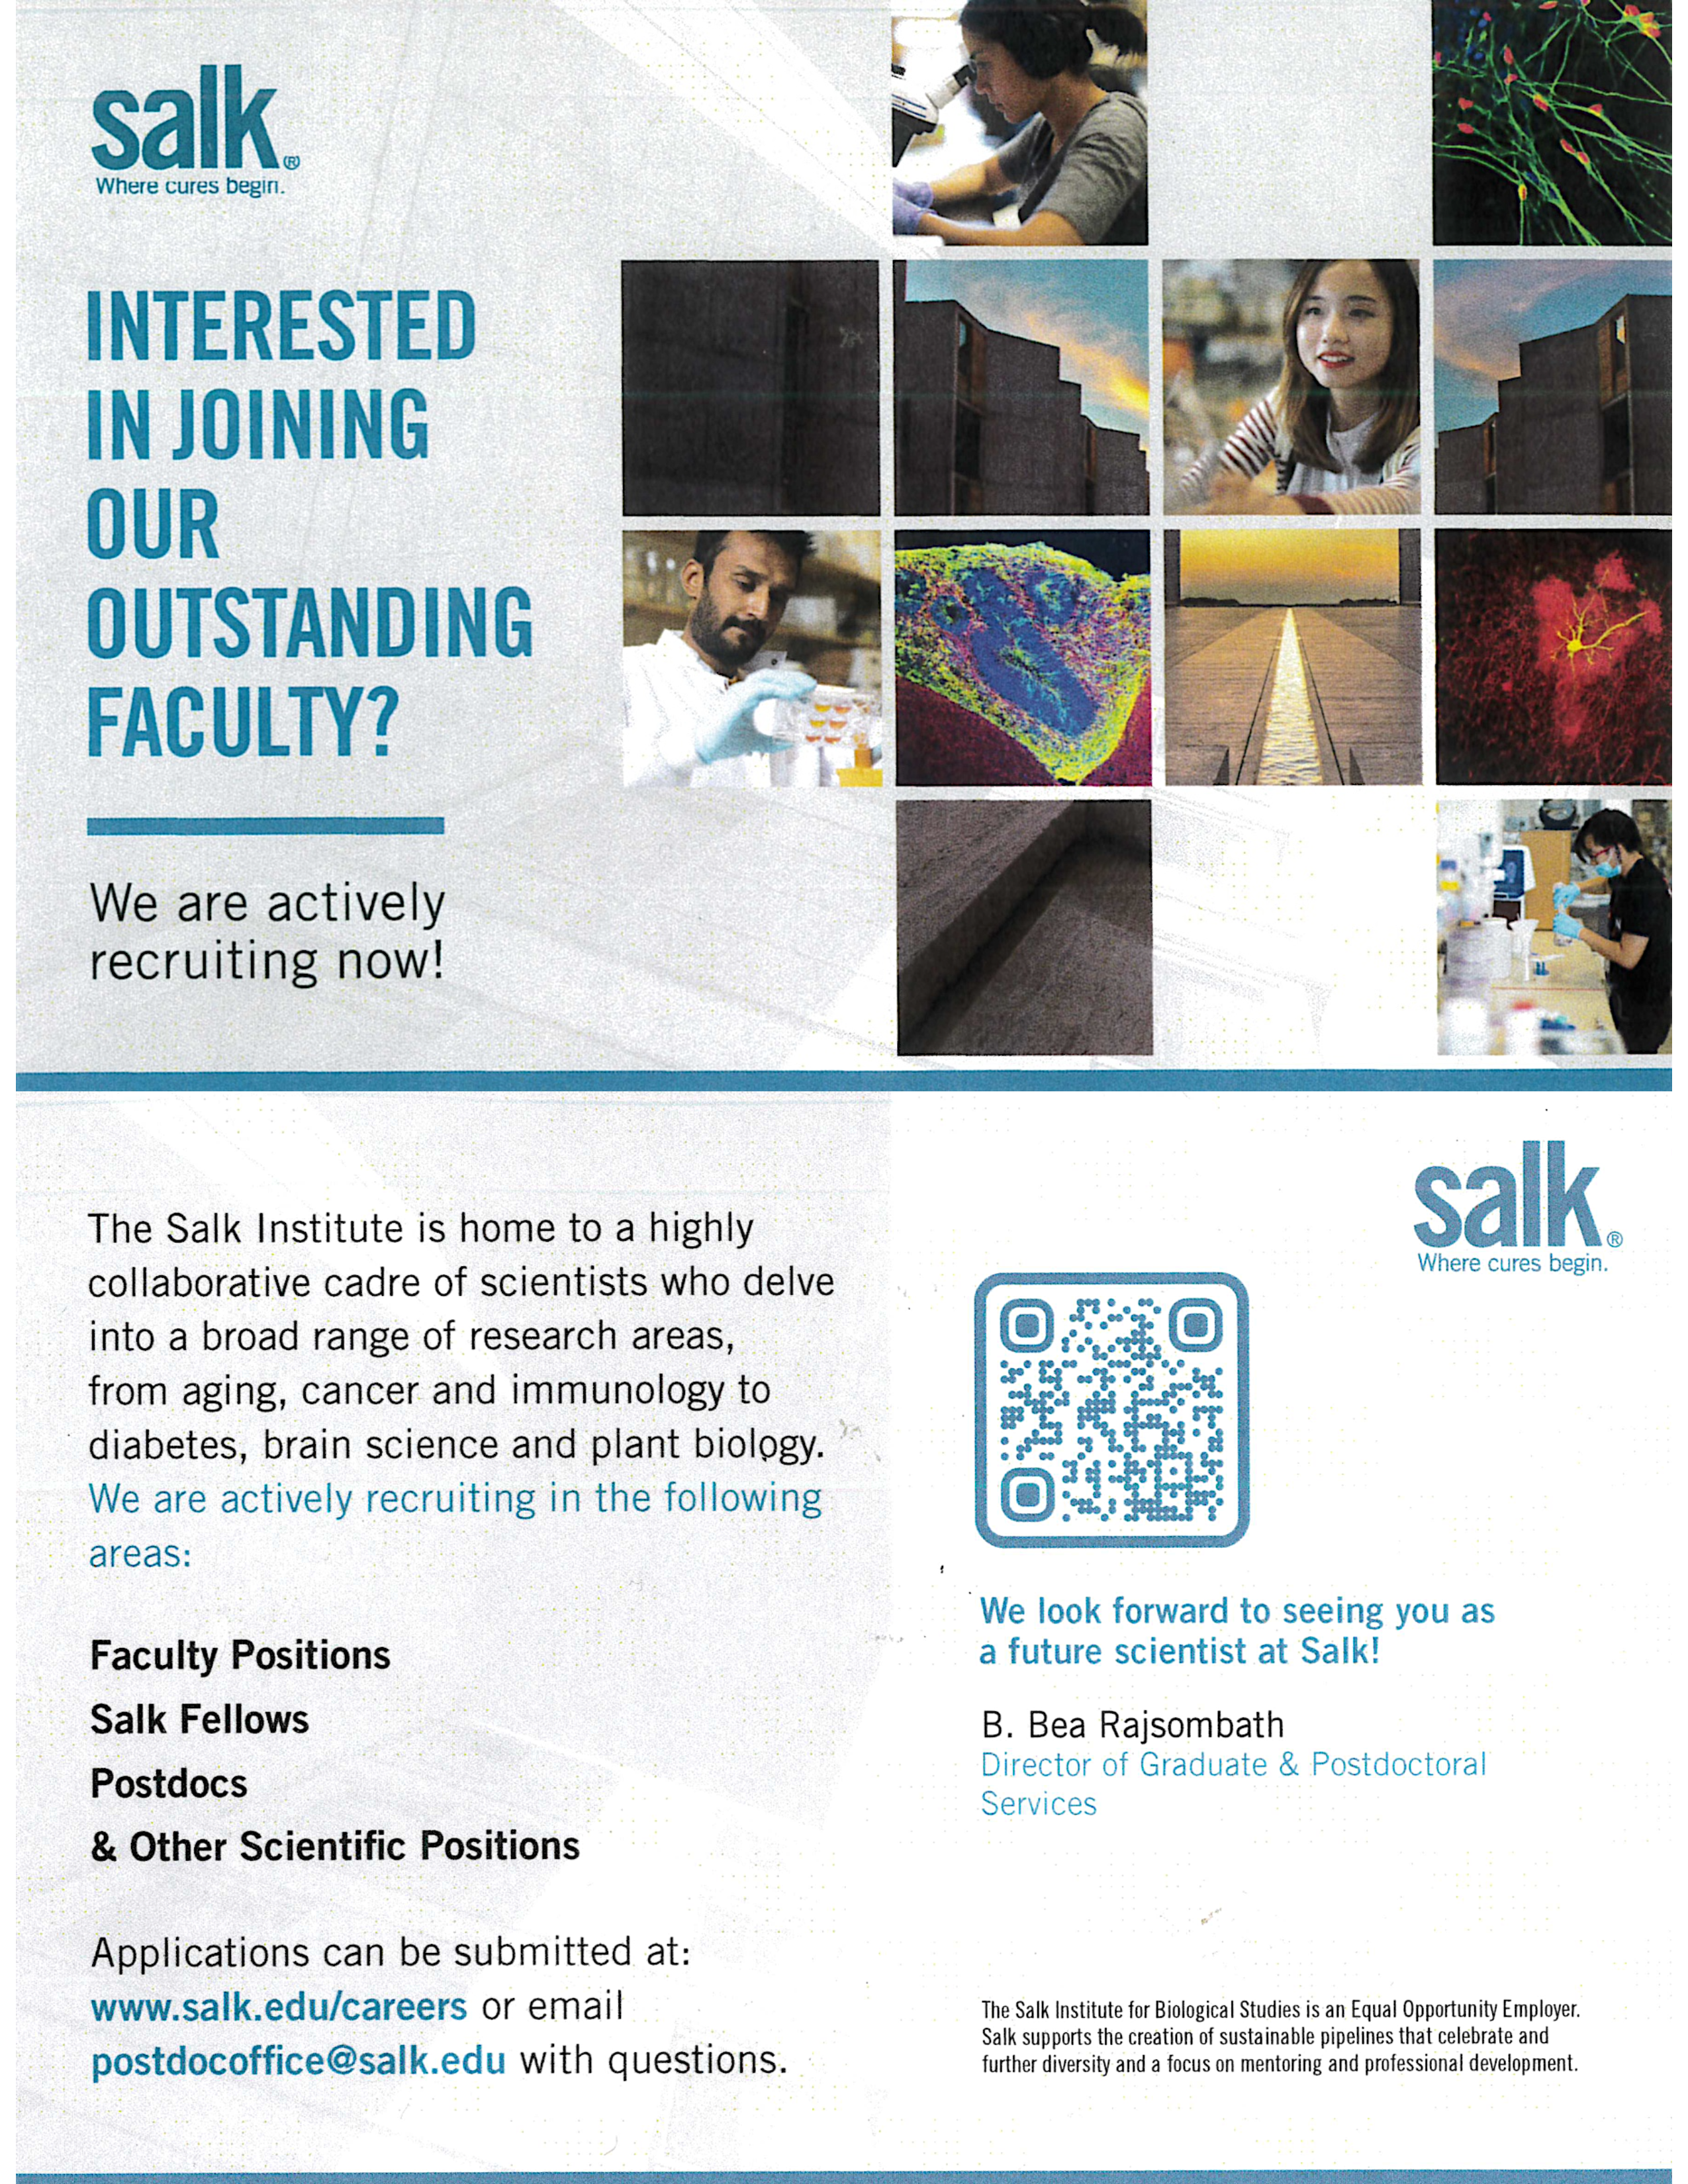 salk_-_interested_in_joining_our_outstanding_faculty_flyer.png